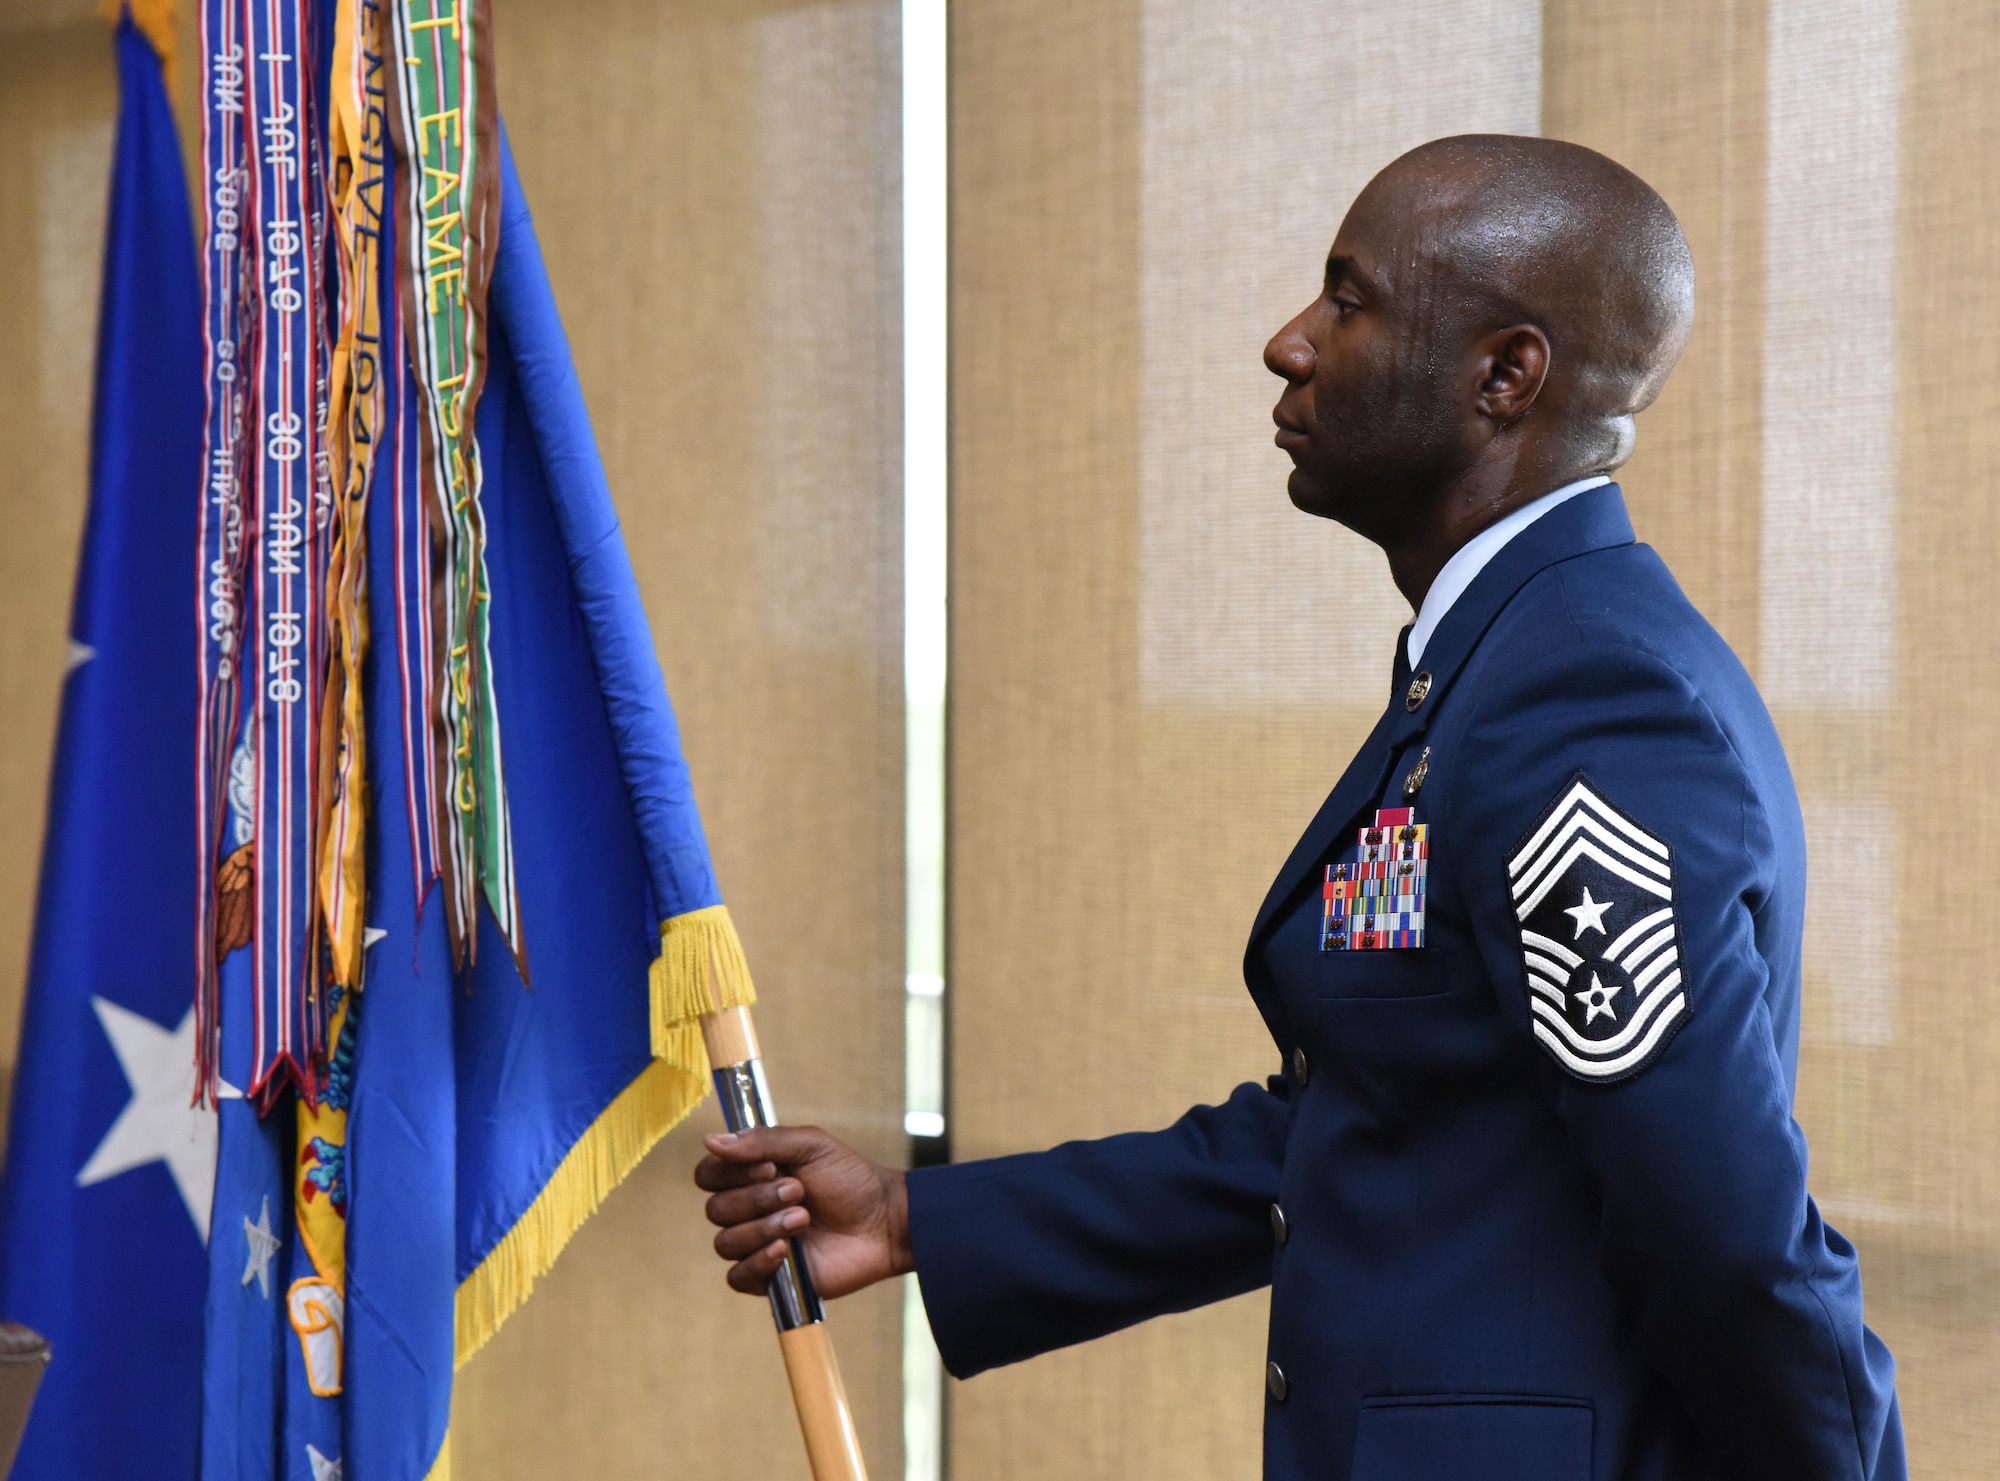 Chief Master Sgt. Vegas Clark, 81st Training Wing command chief, holds the guidon during a change of command ceremony at the Bay Breeze Event Center June 2, 2017, on Keesler Air Force Base, Miss. The ceremony is a symbol of command being exchanged from one commander to the next by the handing-off of a ceremonial guidon. Col. Debra Lovette took command of the 81st TRW from Col. Michele Edmondson. (U.S. Air Force photo by Kemberly Groue)